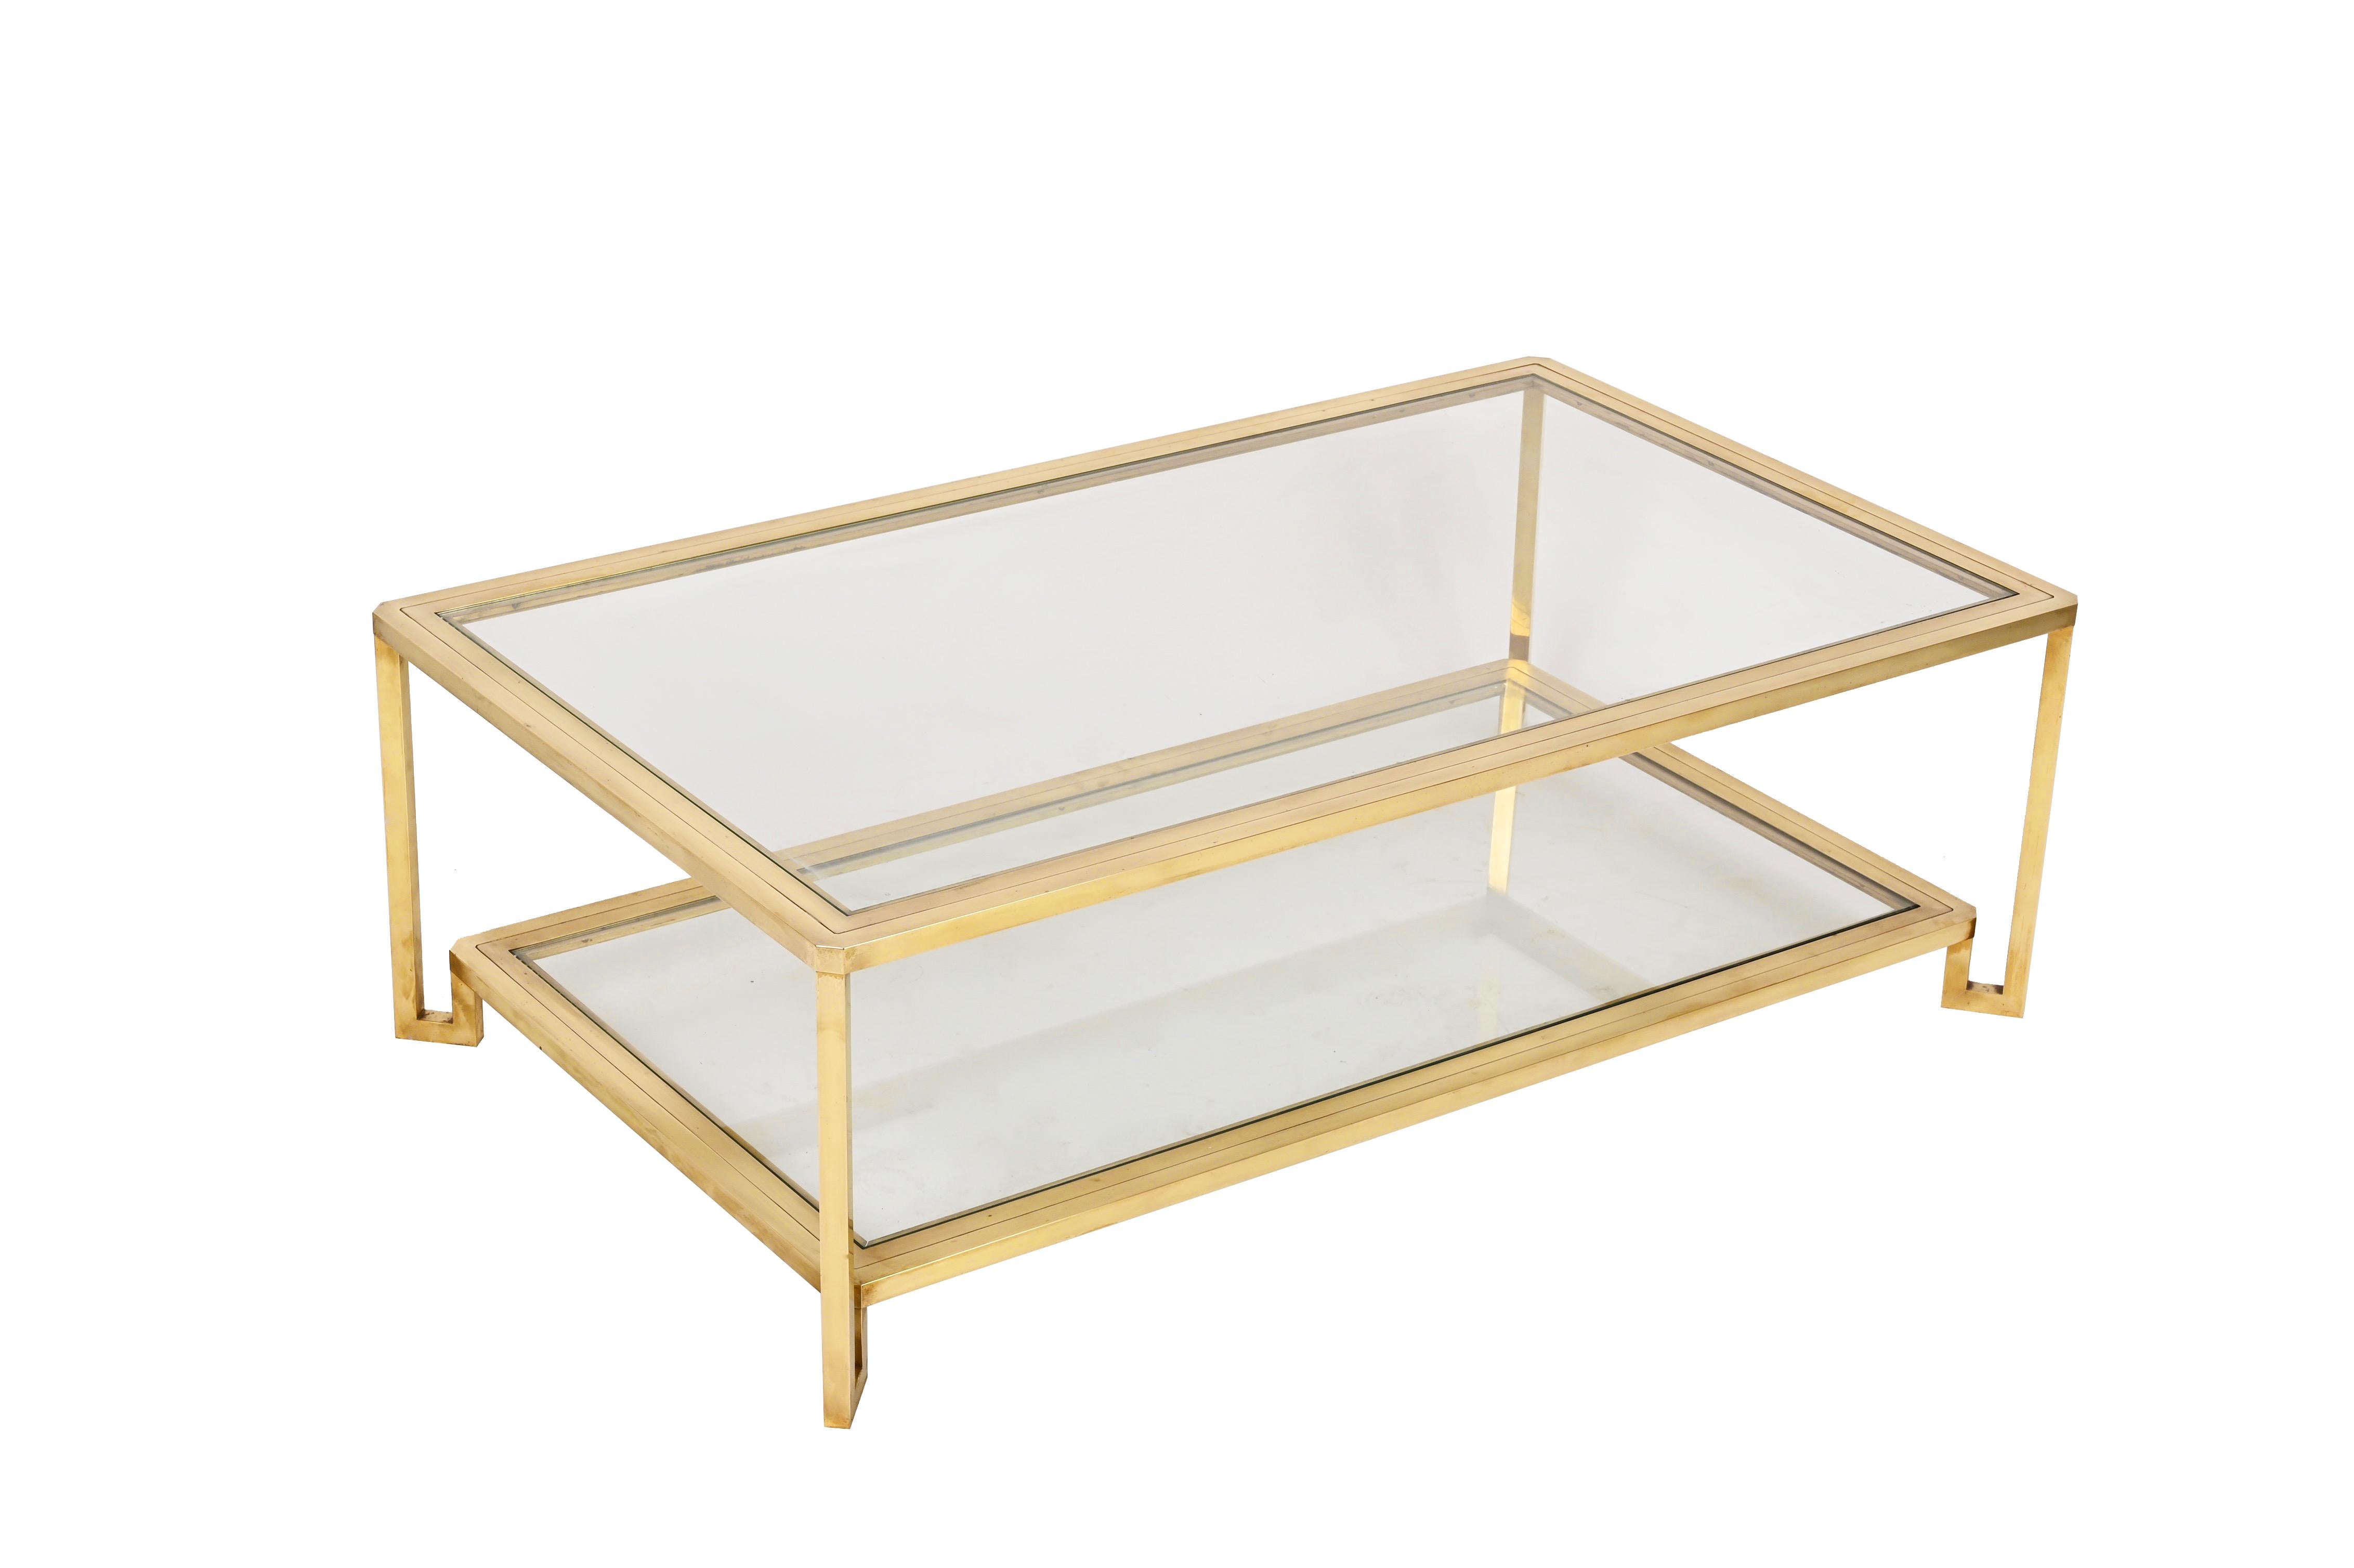 Late 20th Century Midcentury Brass and Glass Italian Double-Tiered Rectangular Coffee Table, 1970s